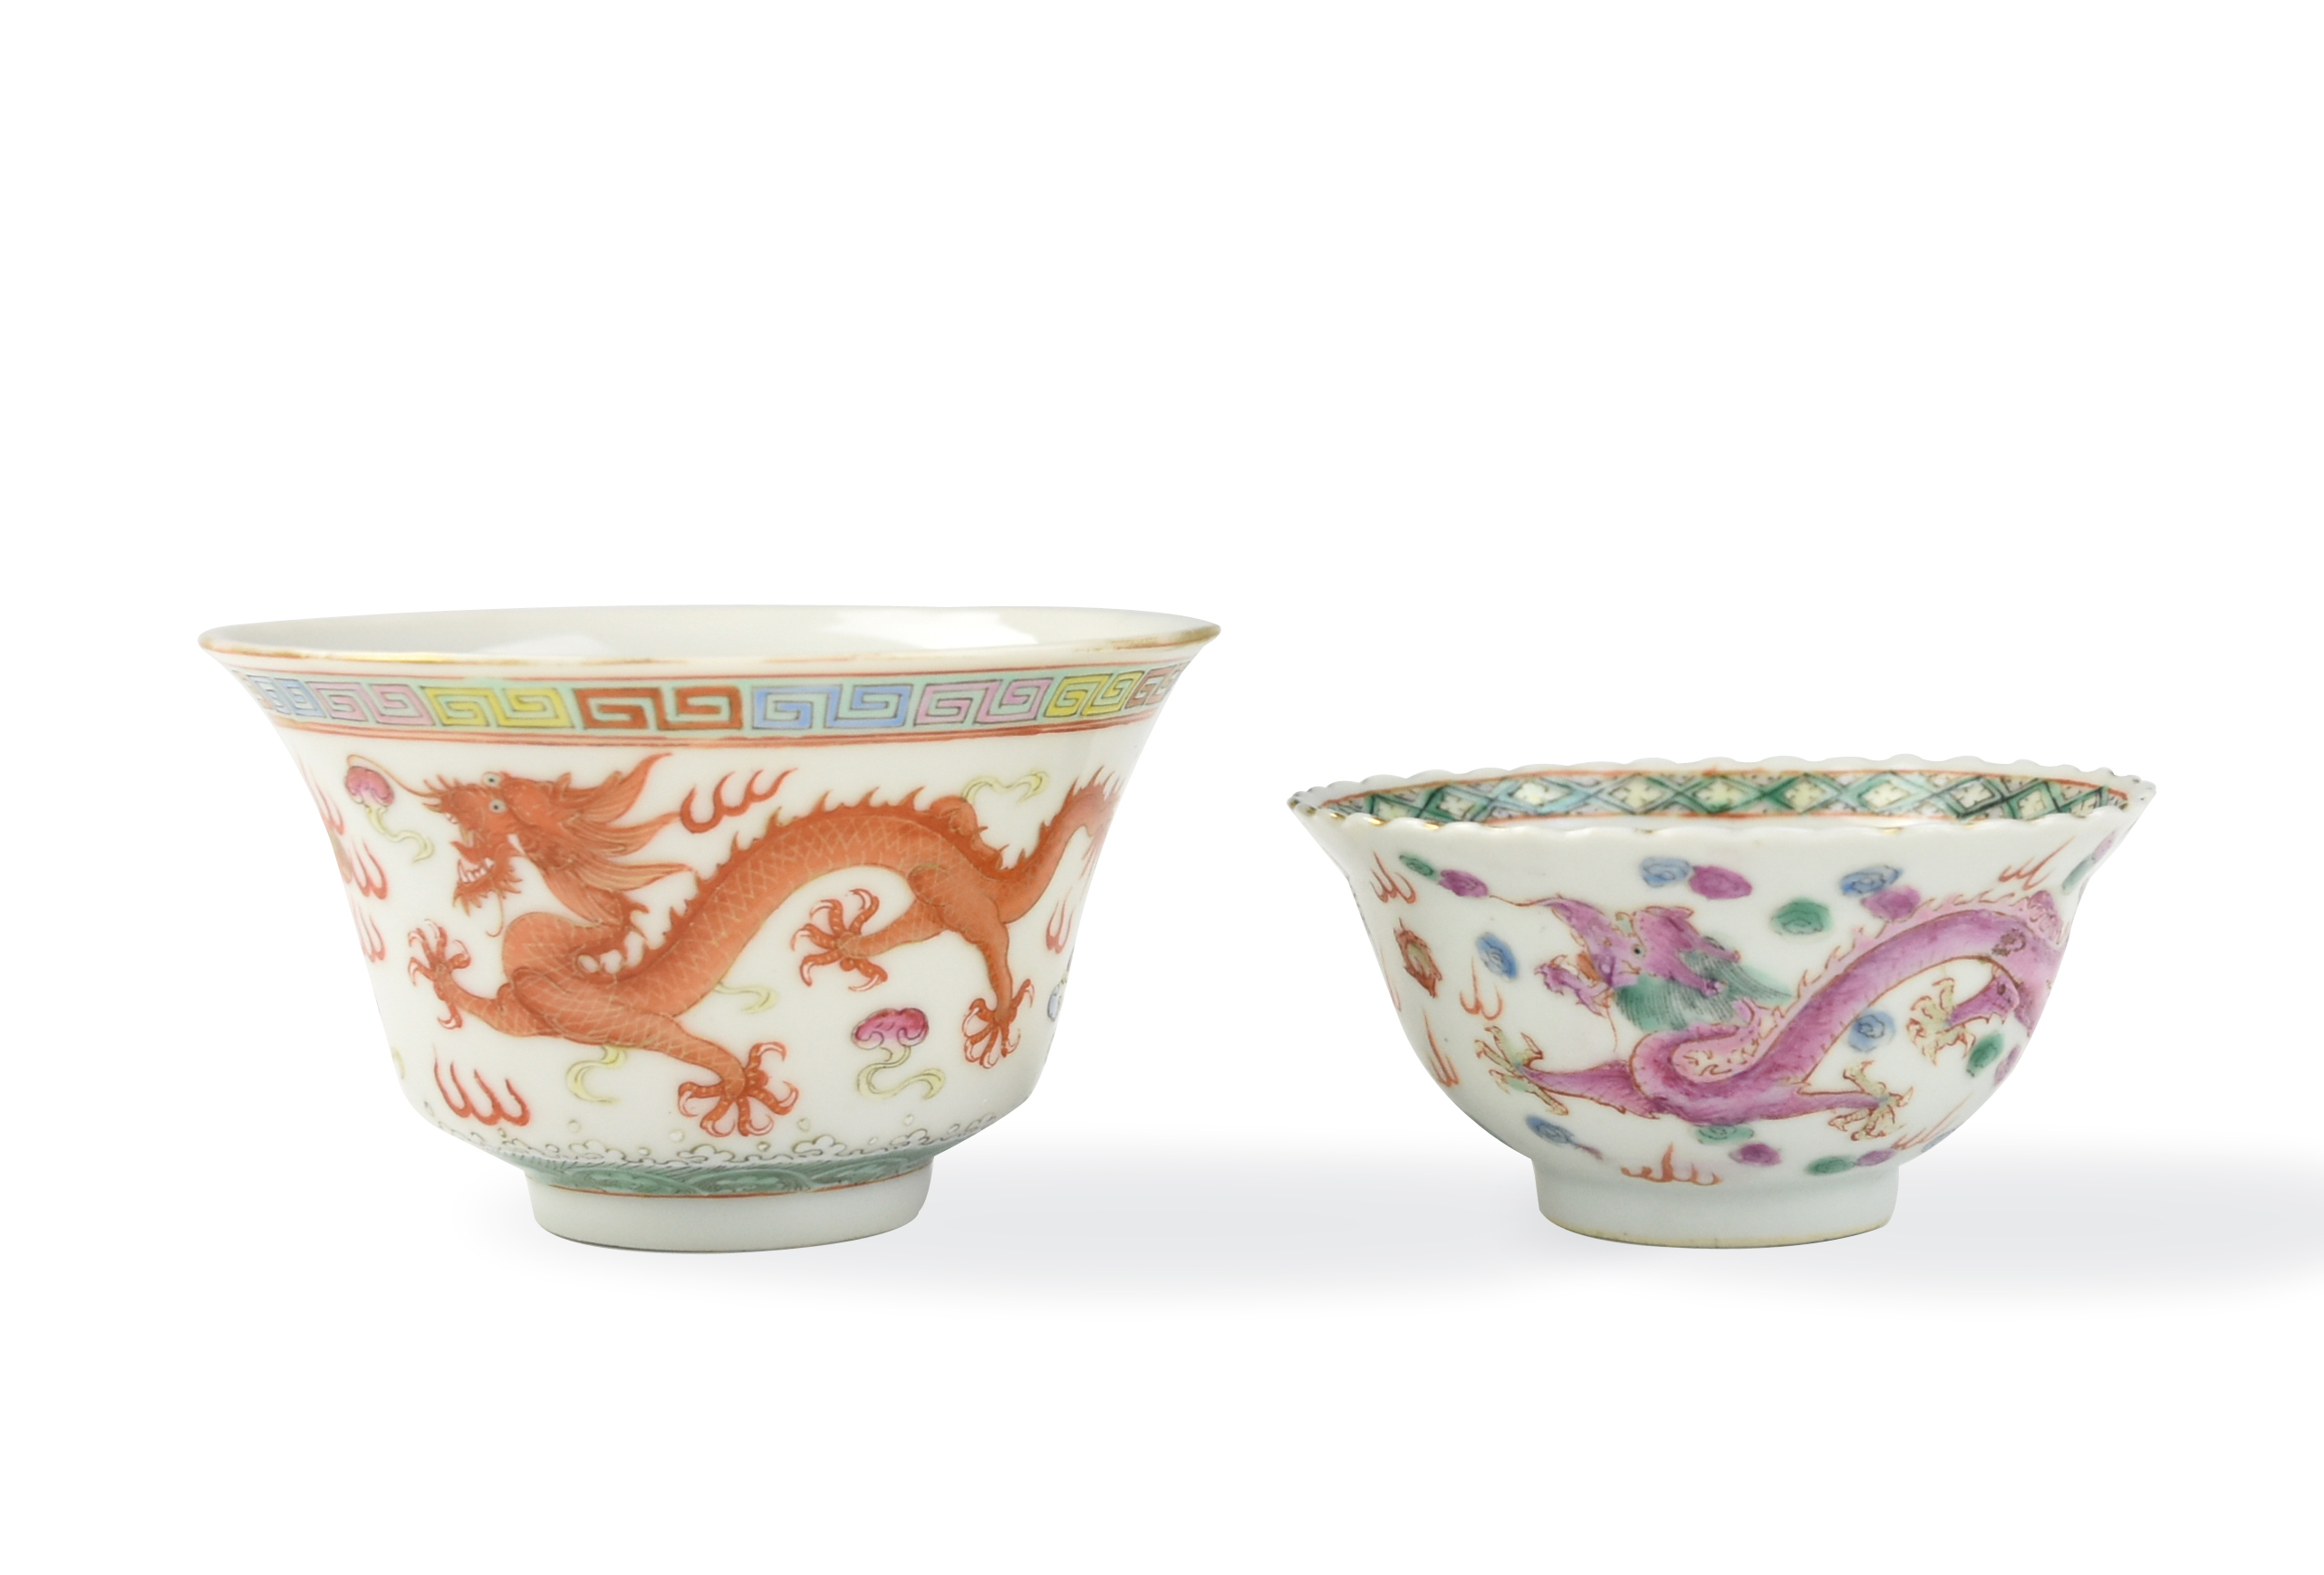 CHINESE FAMILLE ROSE DRAGON CUPS 19 20TH 2ceba9